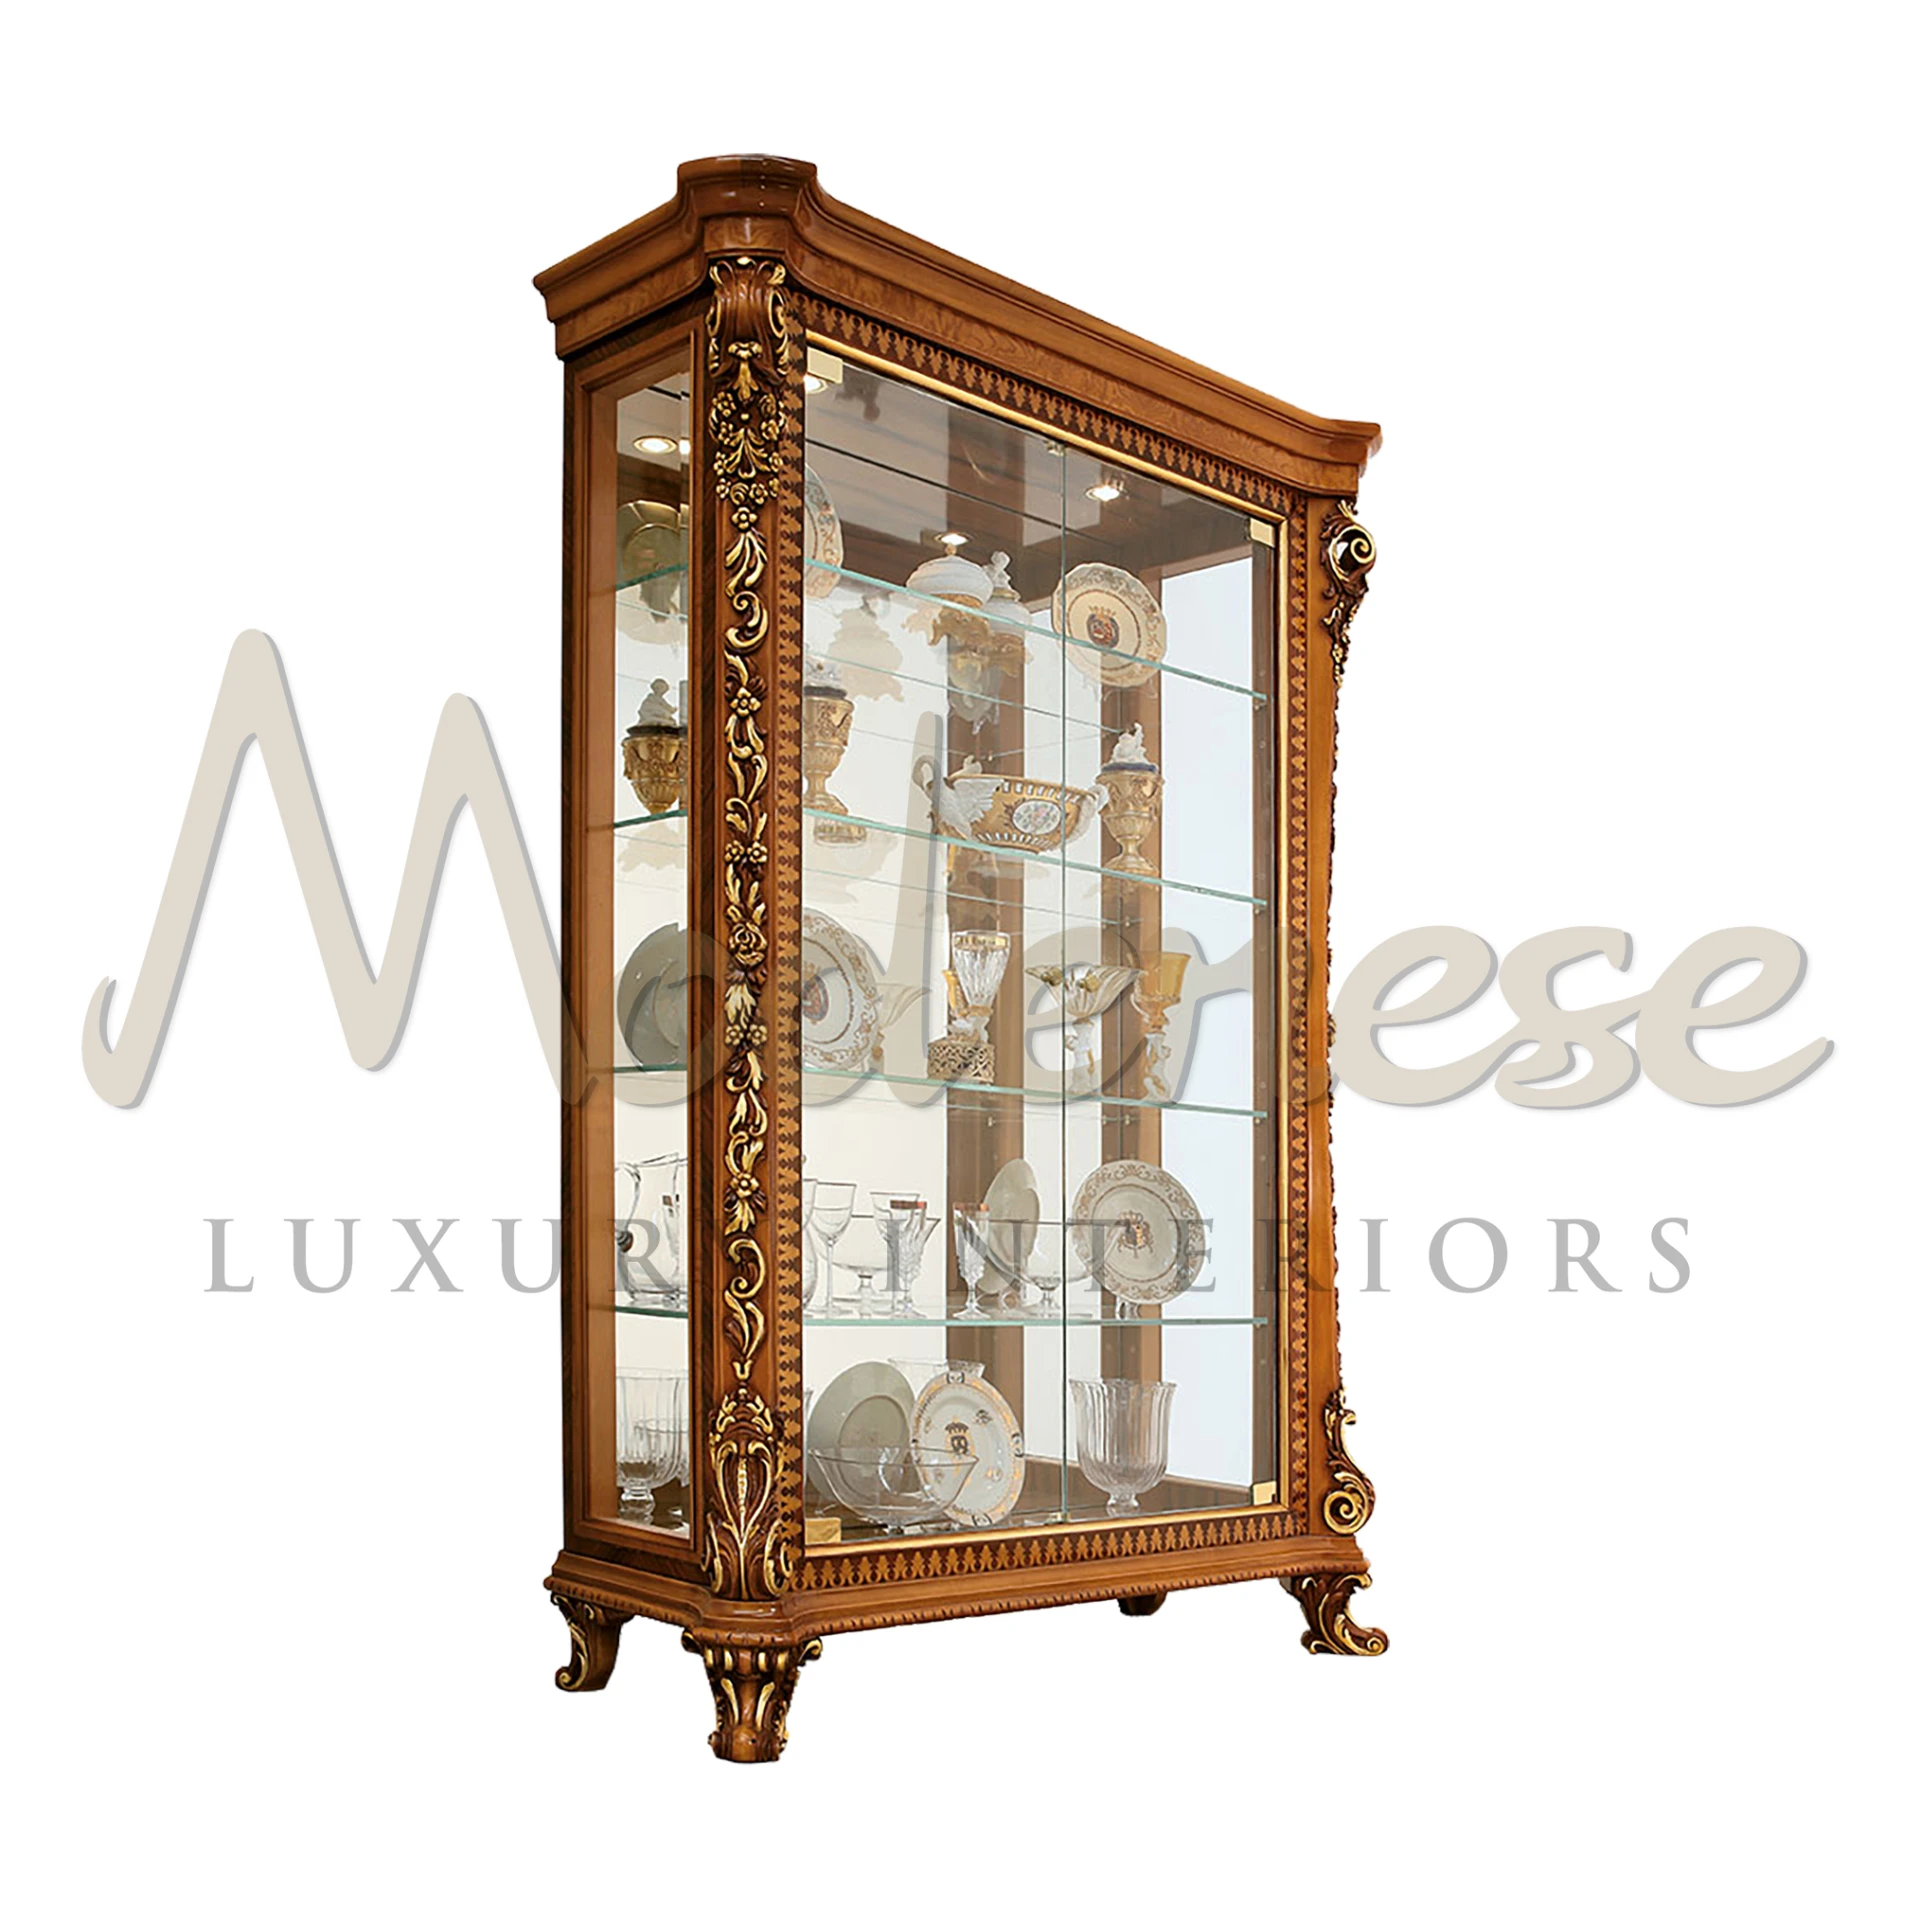 Enhance your dining room with Modenese Furniture's lavish vitrine. Its expansive surfaces are perfect for displaying crystalware, illuminated by elegant chandeliers.